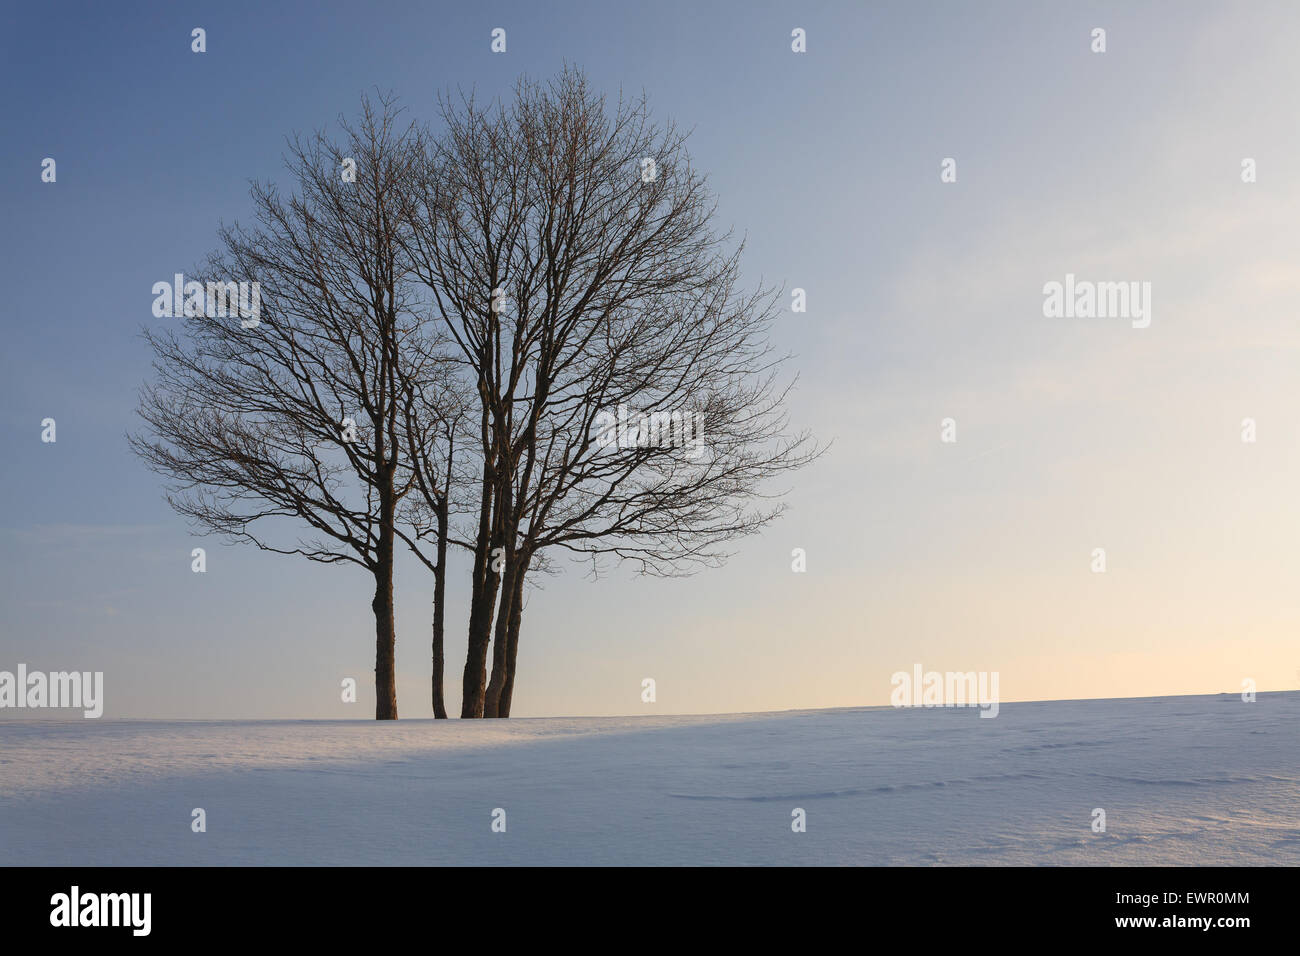 A winter landscape with an isolated tree over a blue sky Stock Photo